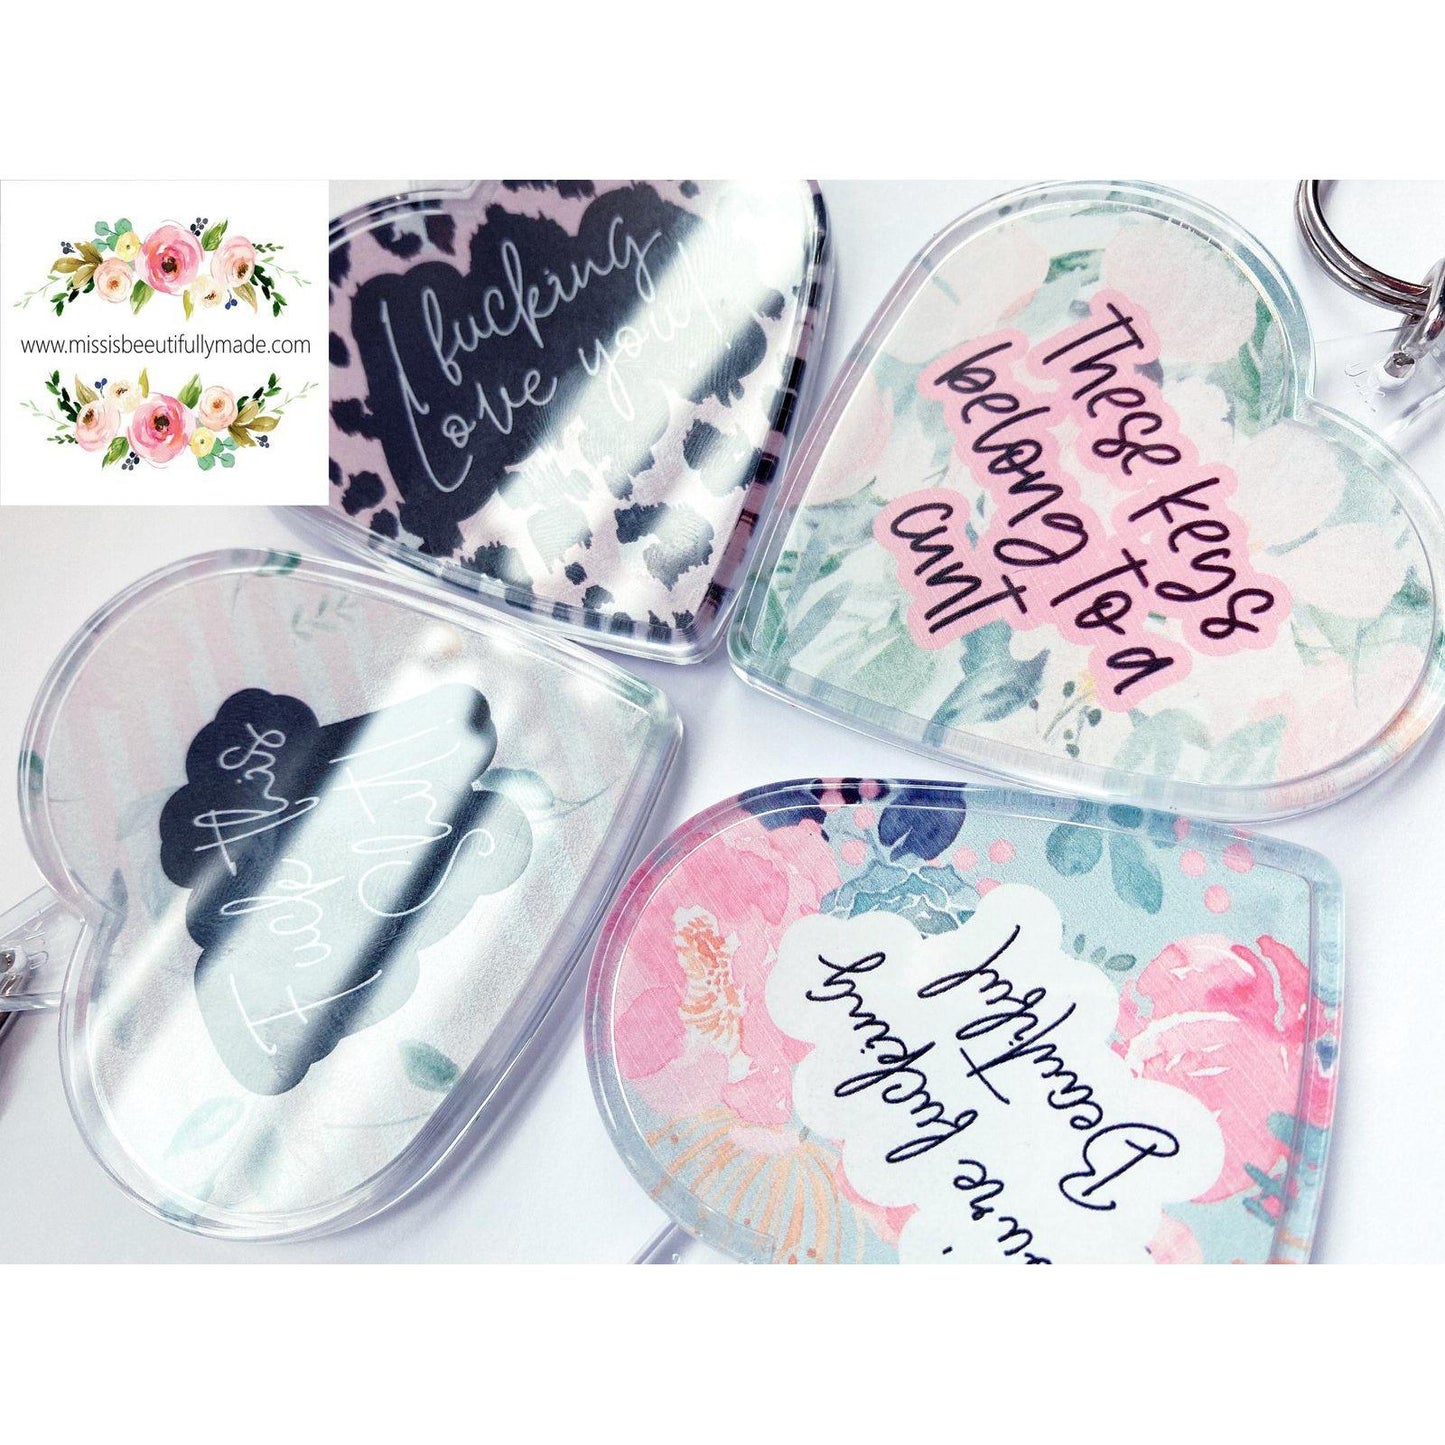 4 acrylic heart keyrings with various designs. Some examples of the quotes are 'fuck this shit', i fucking love you' and 'you're fucking beautiful'.